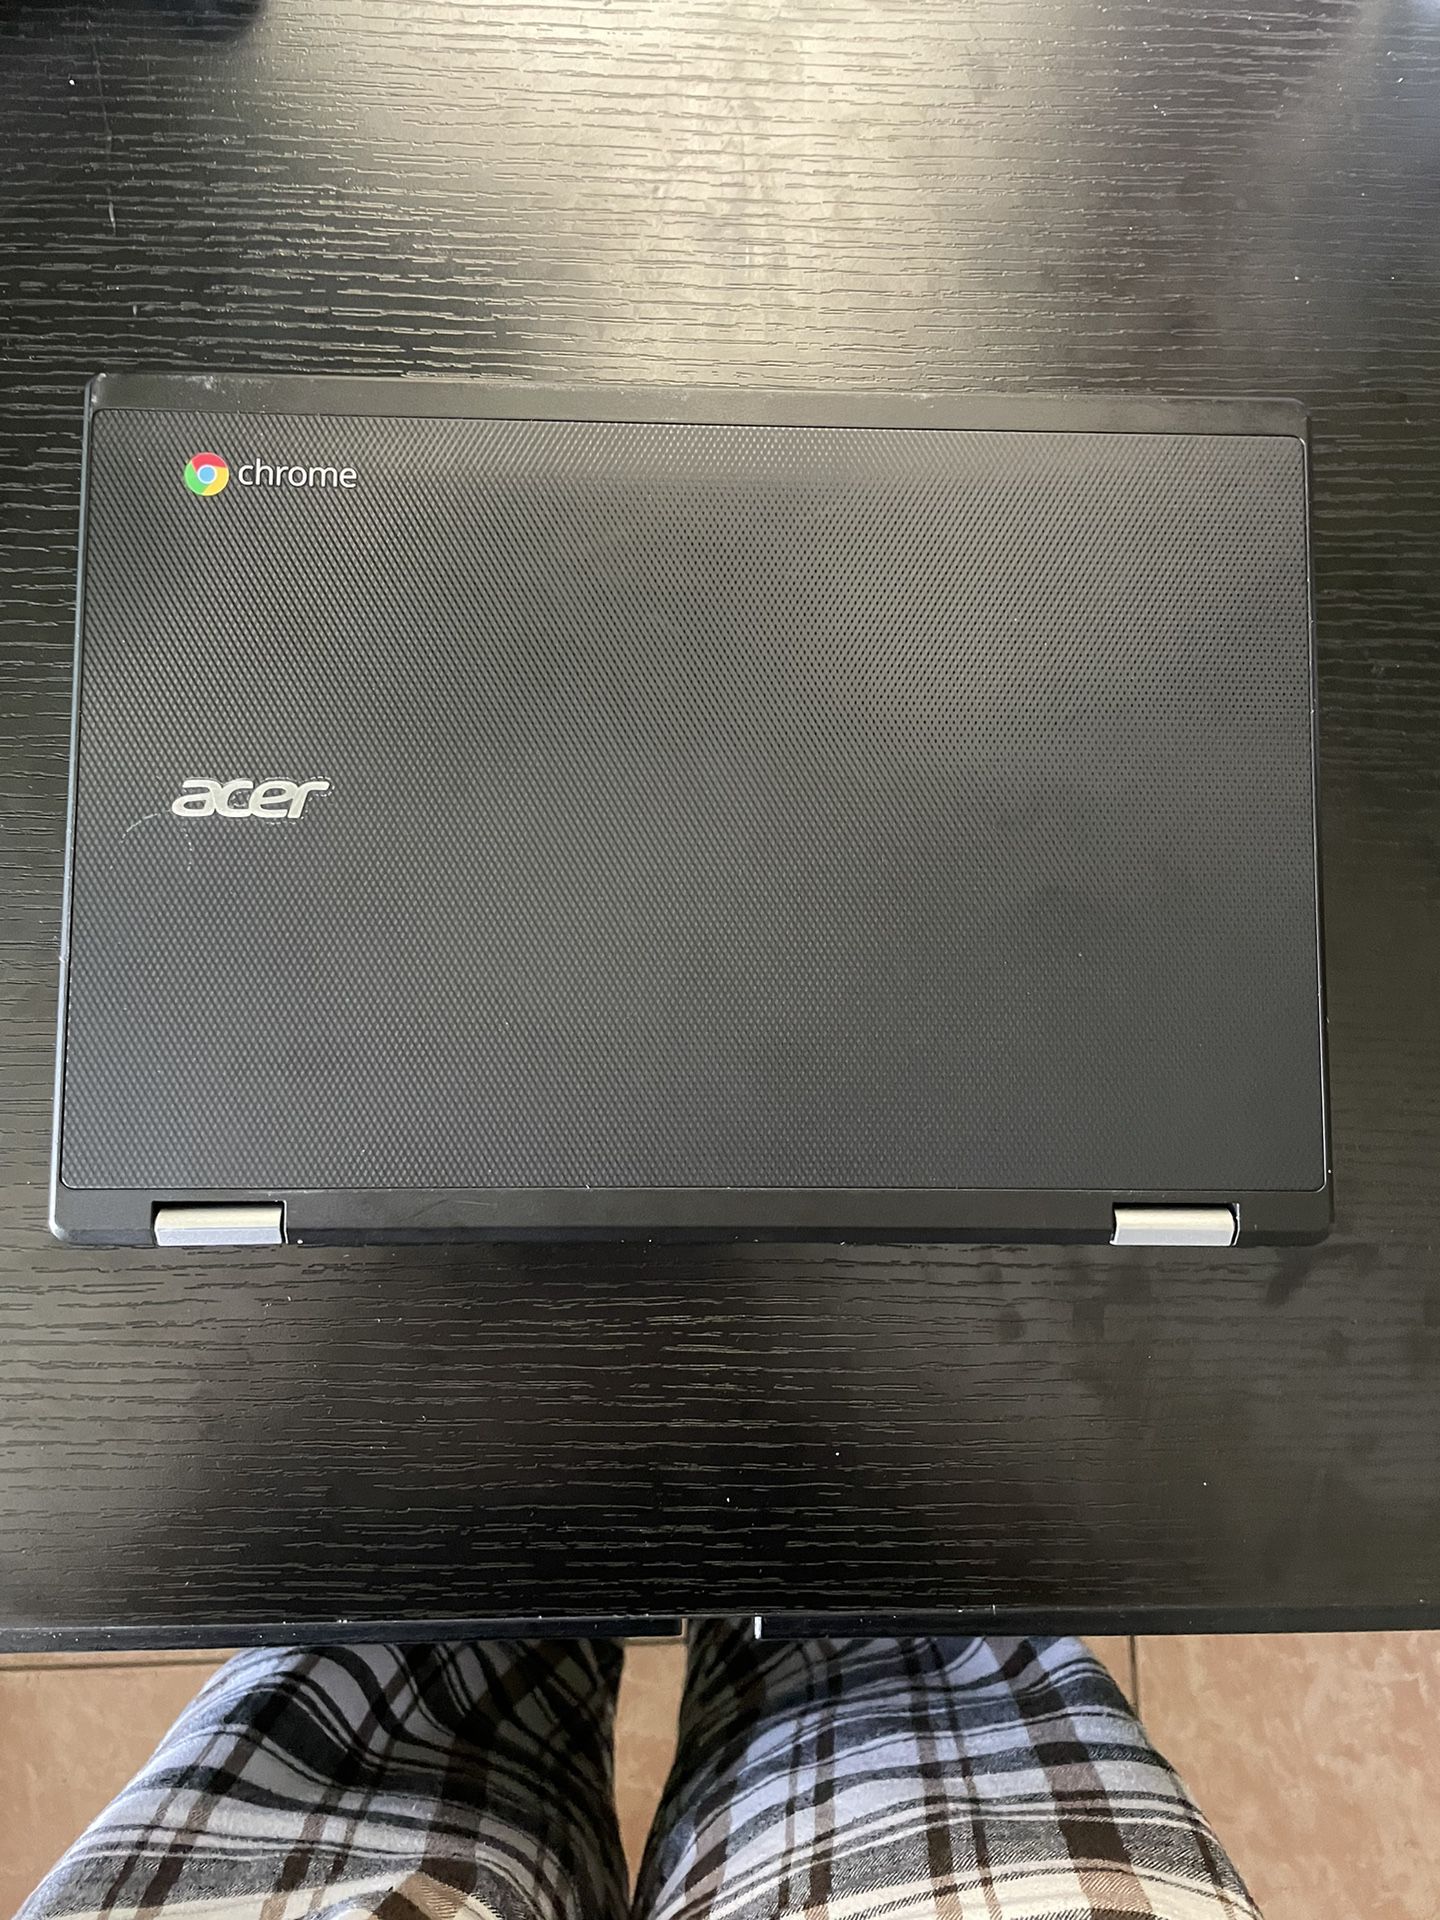 Acer Chromebook Computer (comes With The Charger